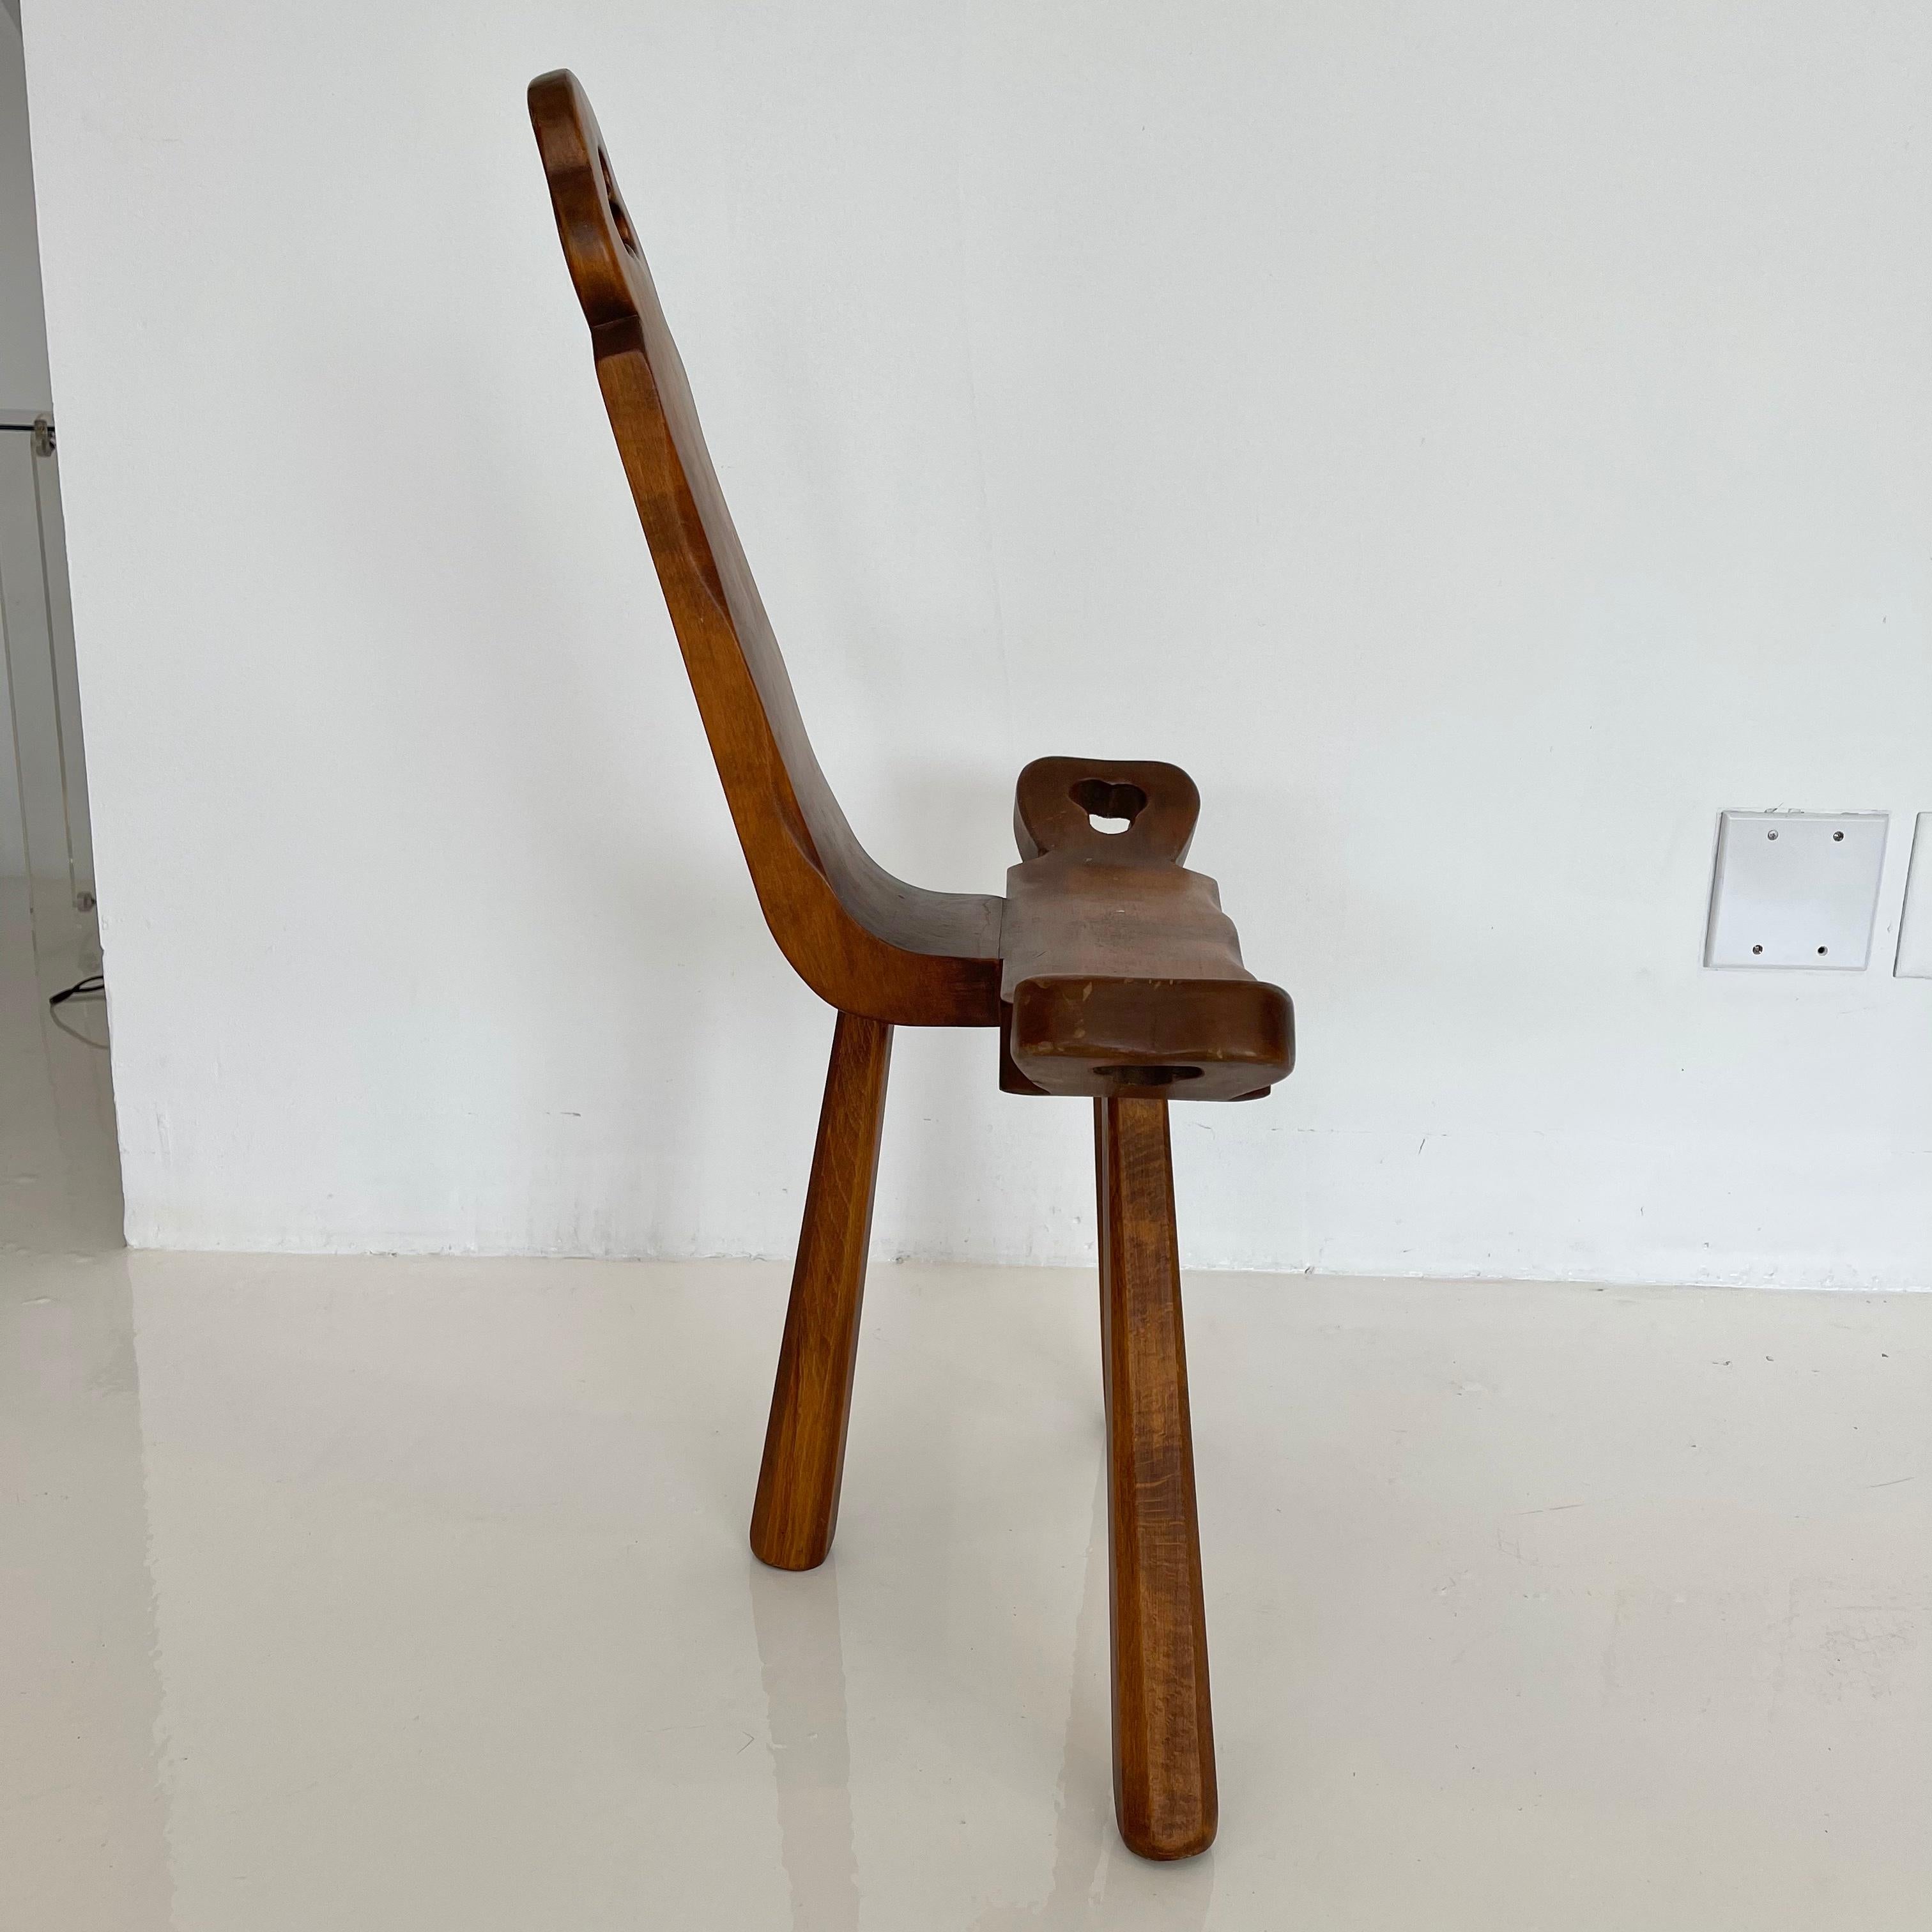 the first chair ever made